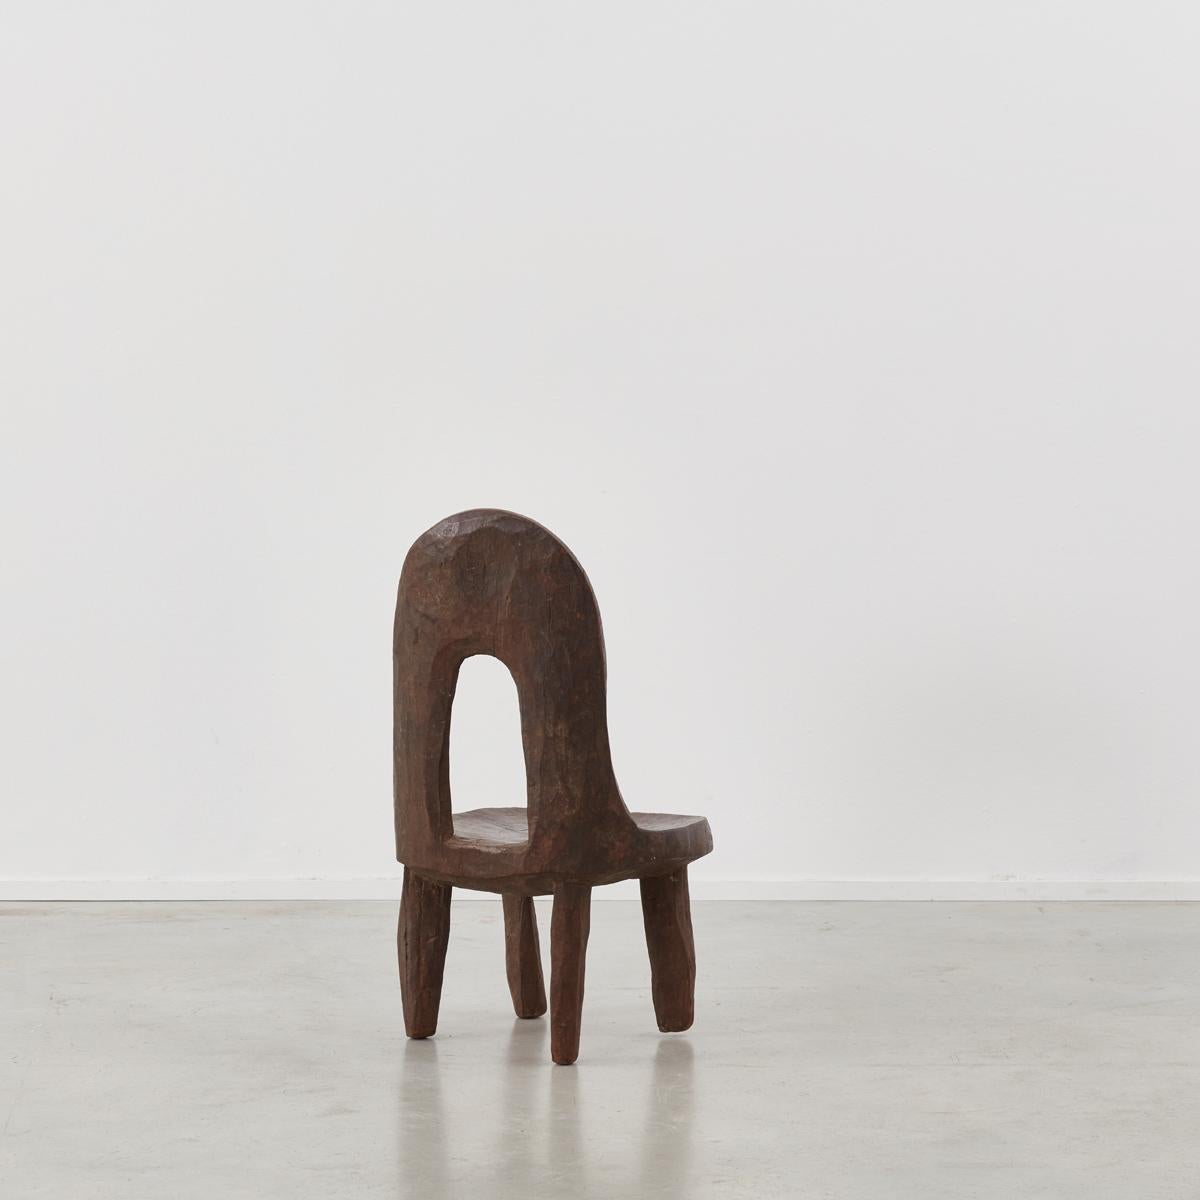 This chair from Ethiopia has a truly lovely presence. It was crafted from a single piece of dark hardwood. Pretty impressive considering the density of the wood involved. Each leg is not uniform, but it does function as intended and the seat can